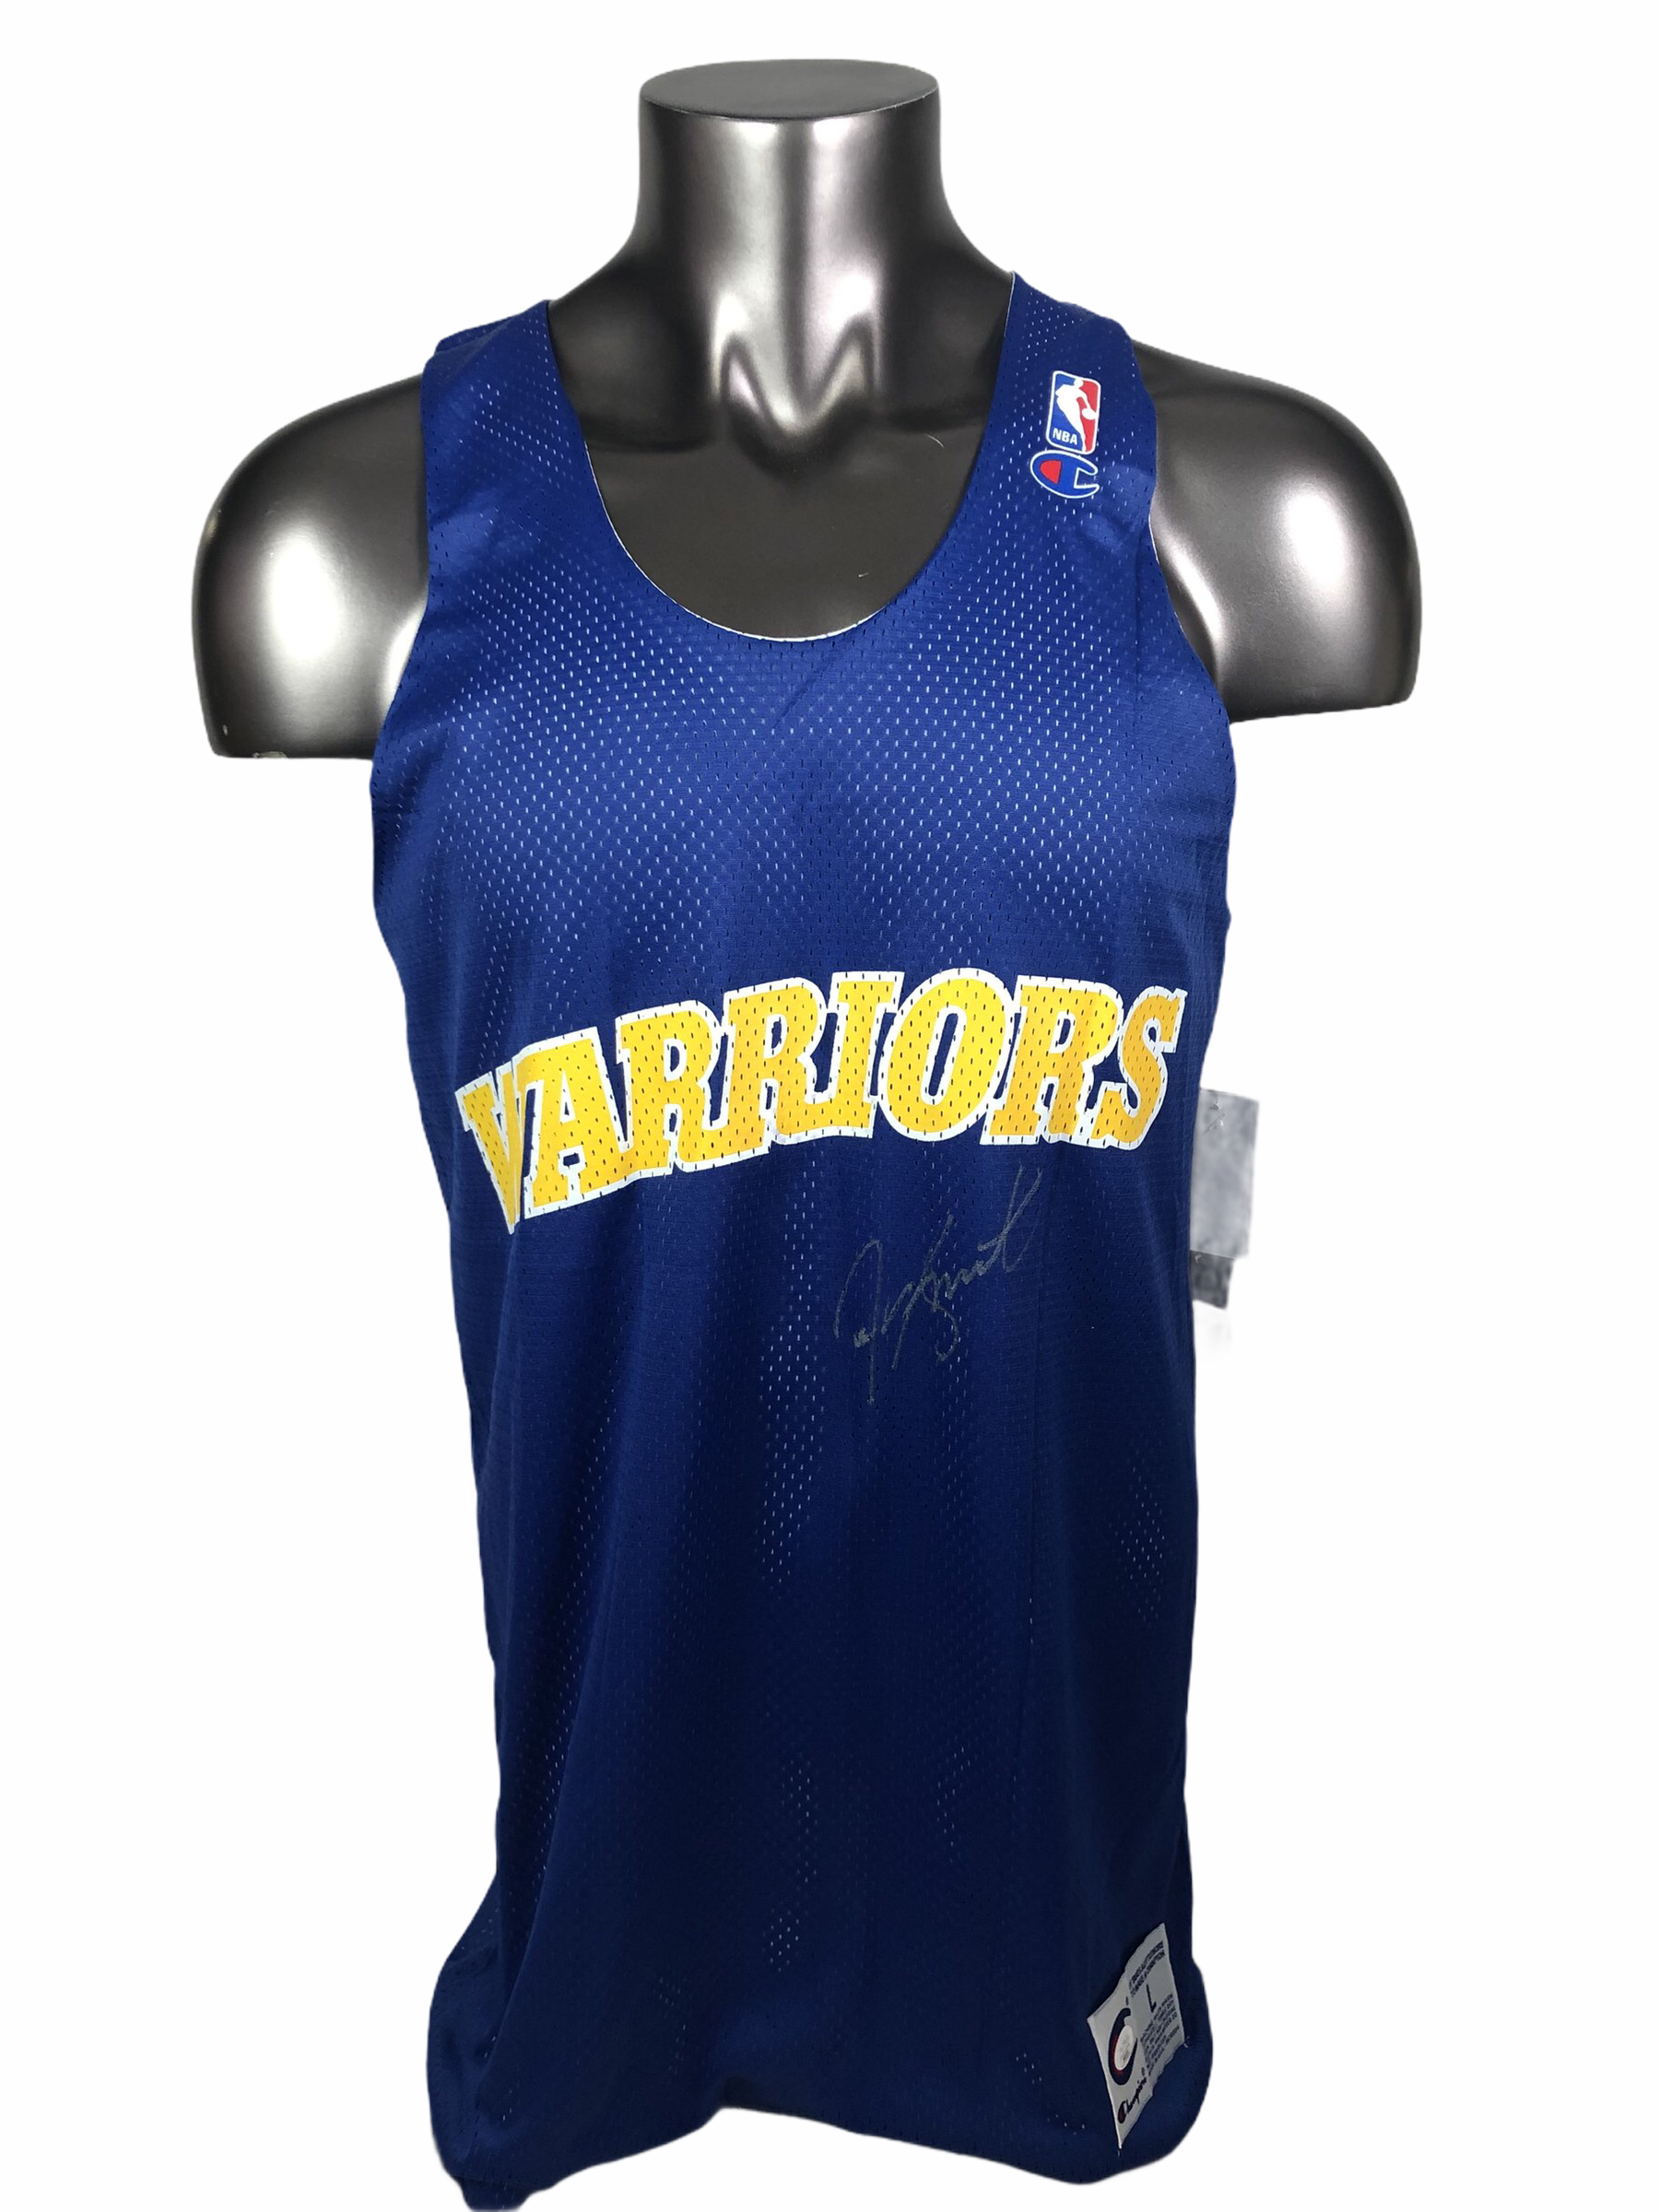 Golden State Warriors' City Edition Jersey Designed By Fil-Am